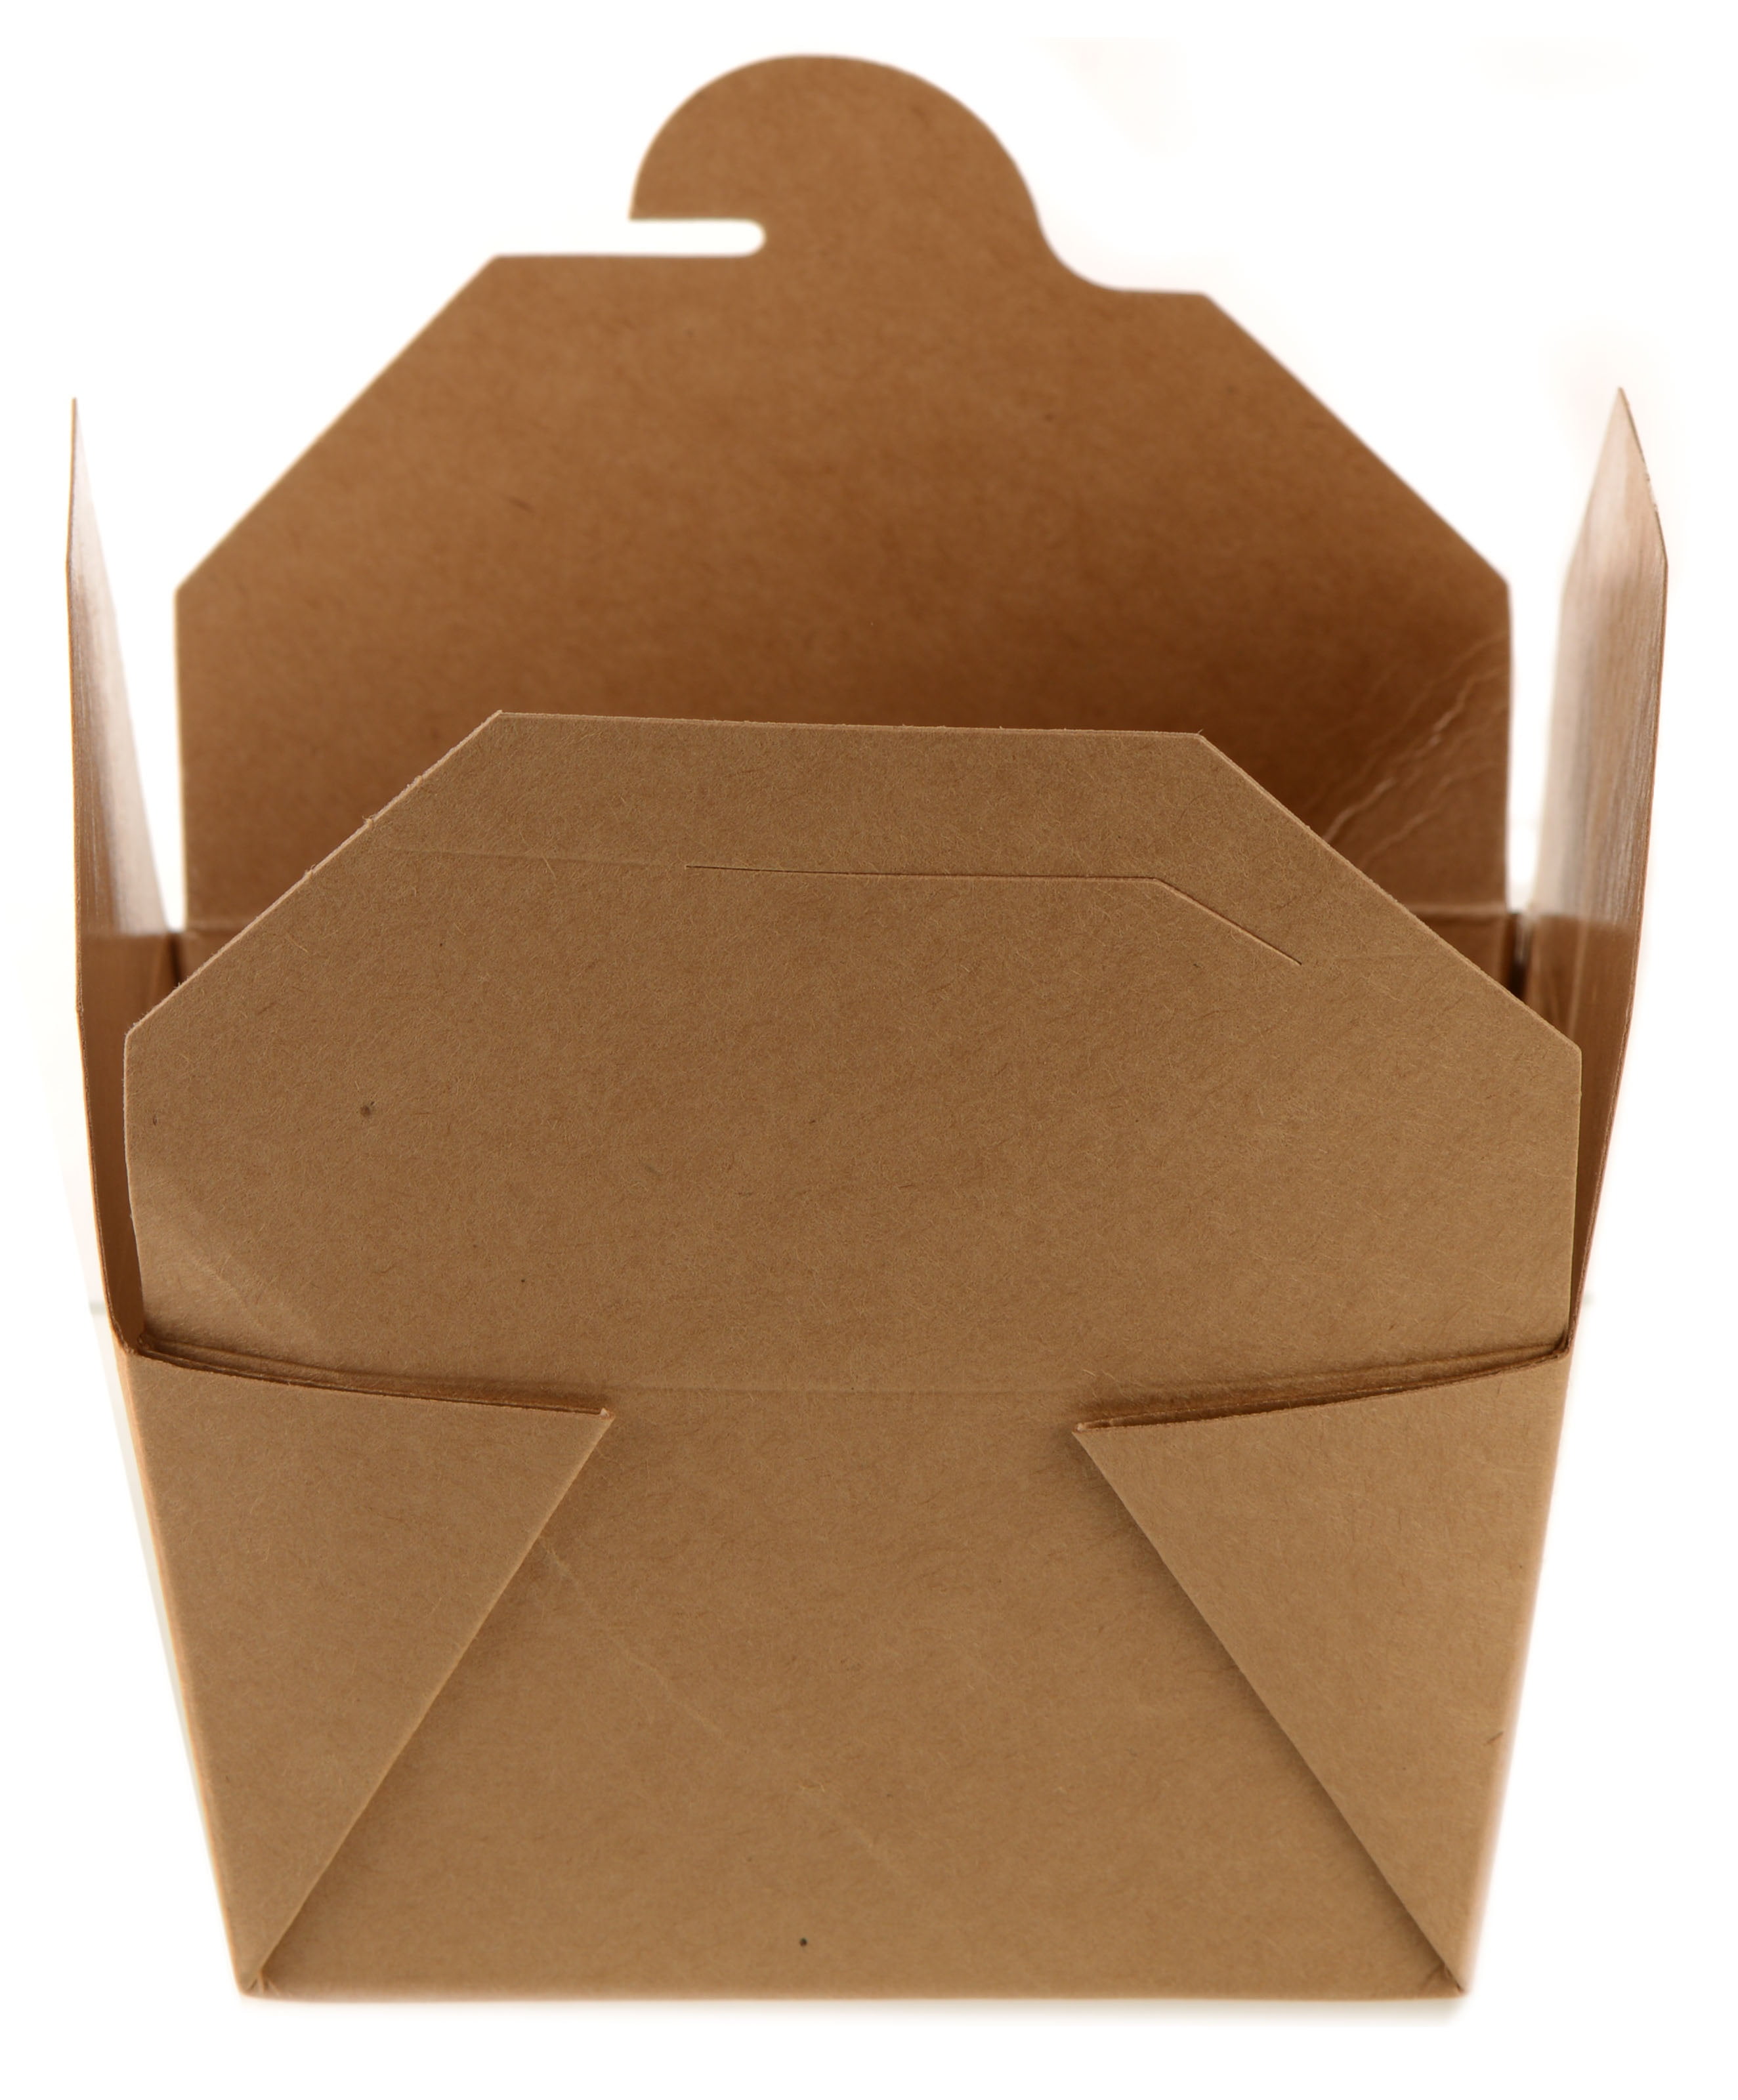 Takeout Food Containers 8 Oz Microwaveable Kraft Brown Paper Mini Chinese  Take Out Box (50 Pack) Leak and Grease Resistant Stackable to Go Boxes 